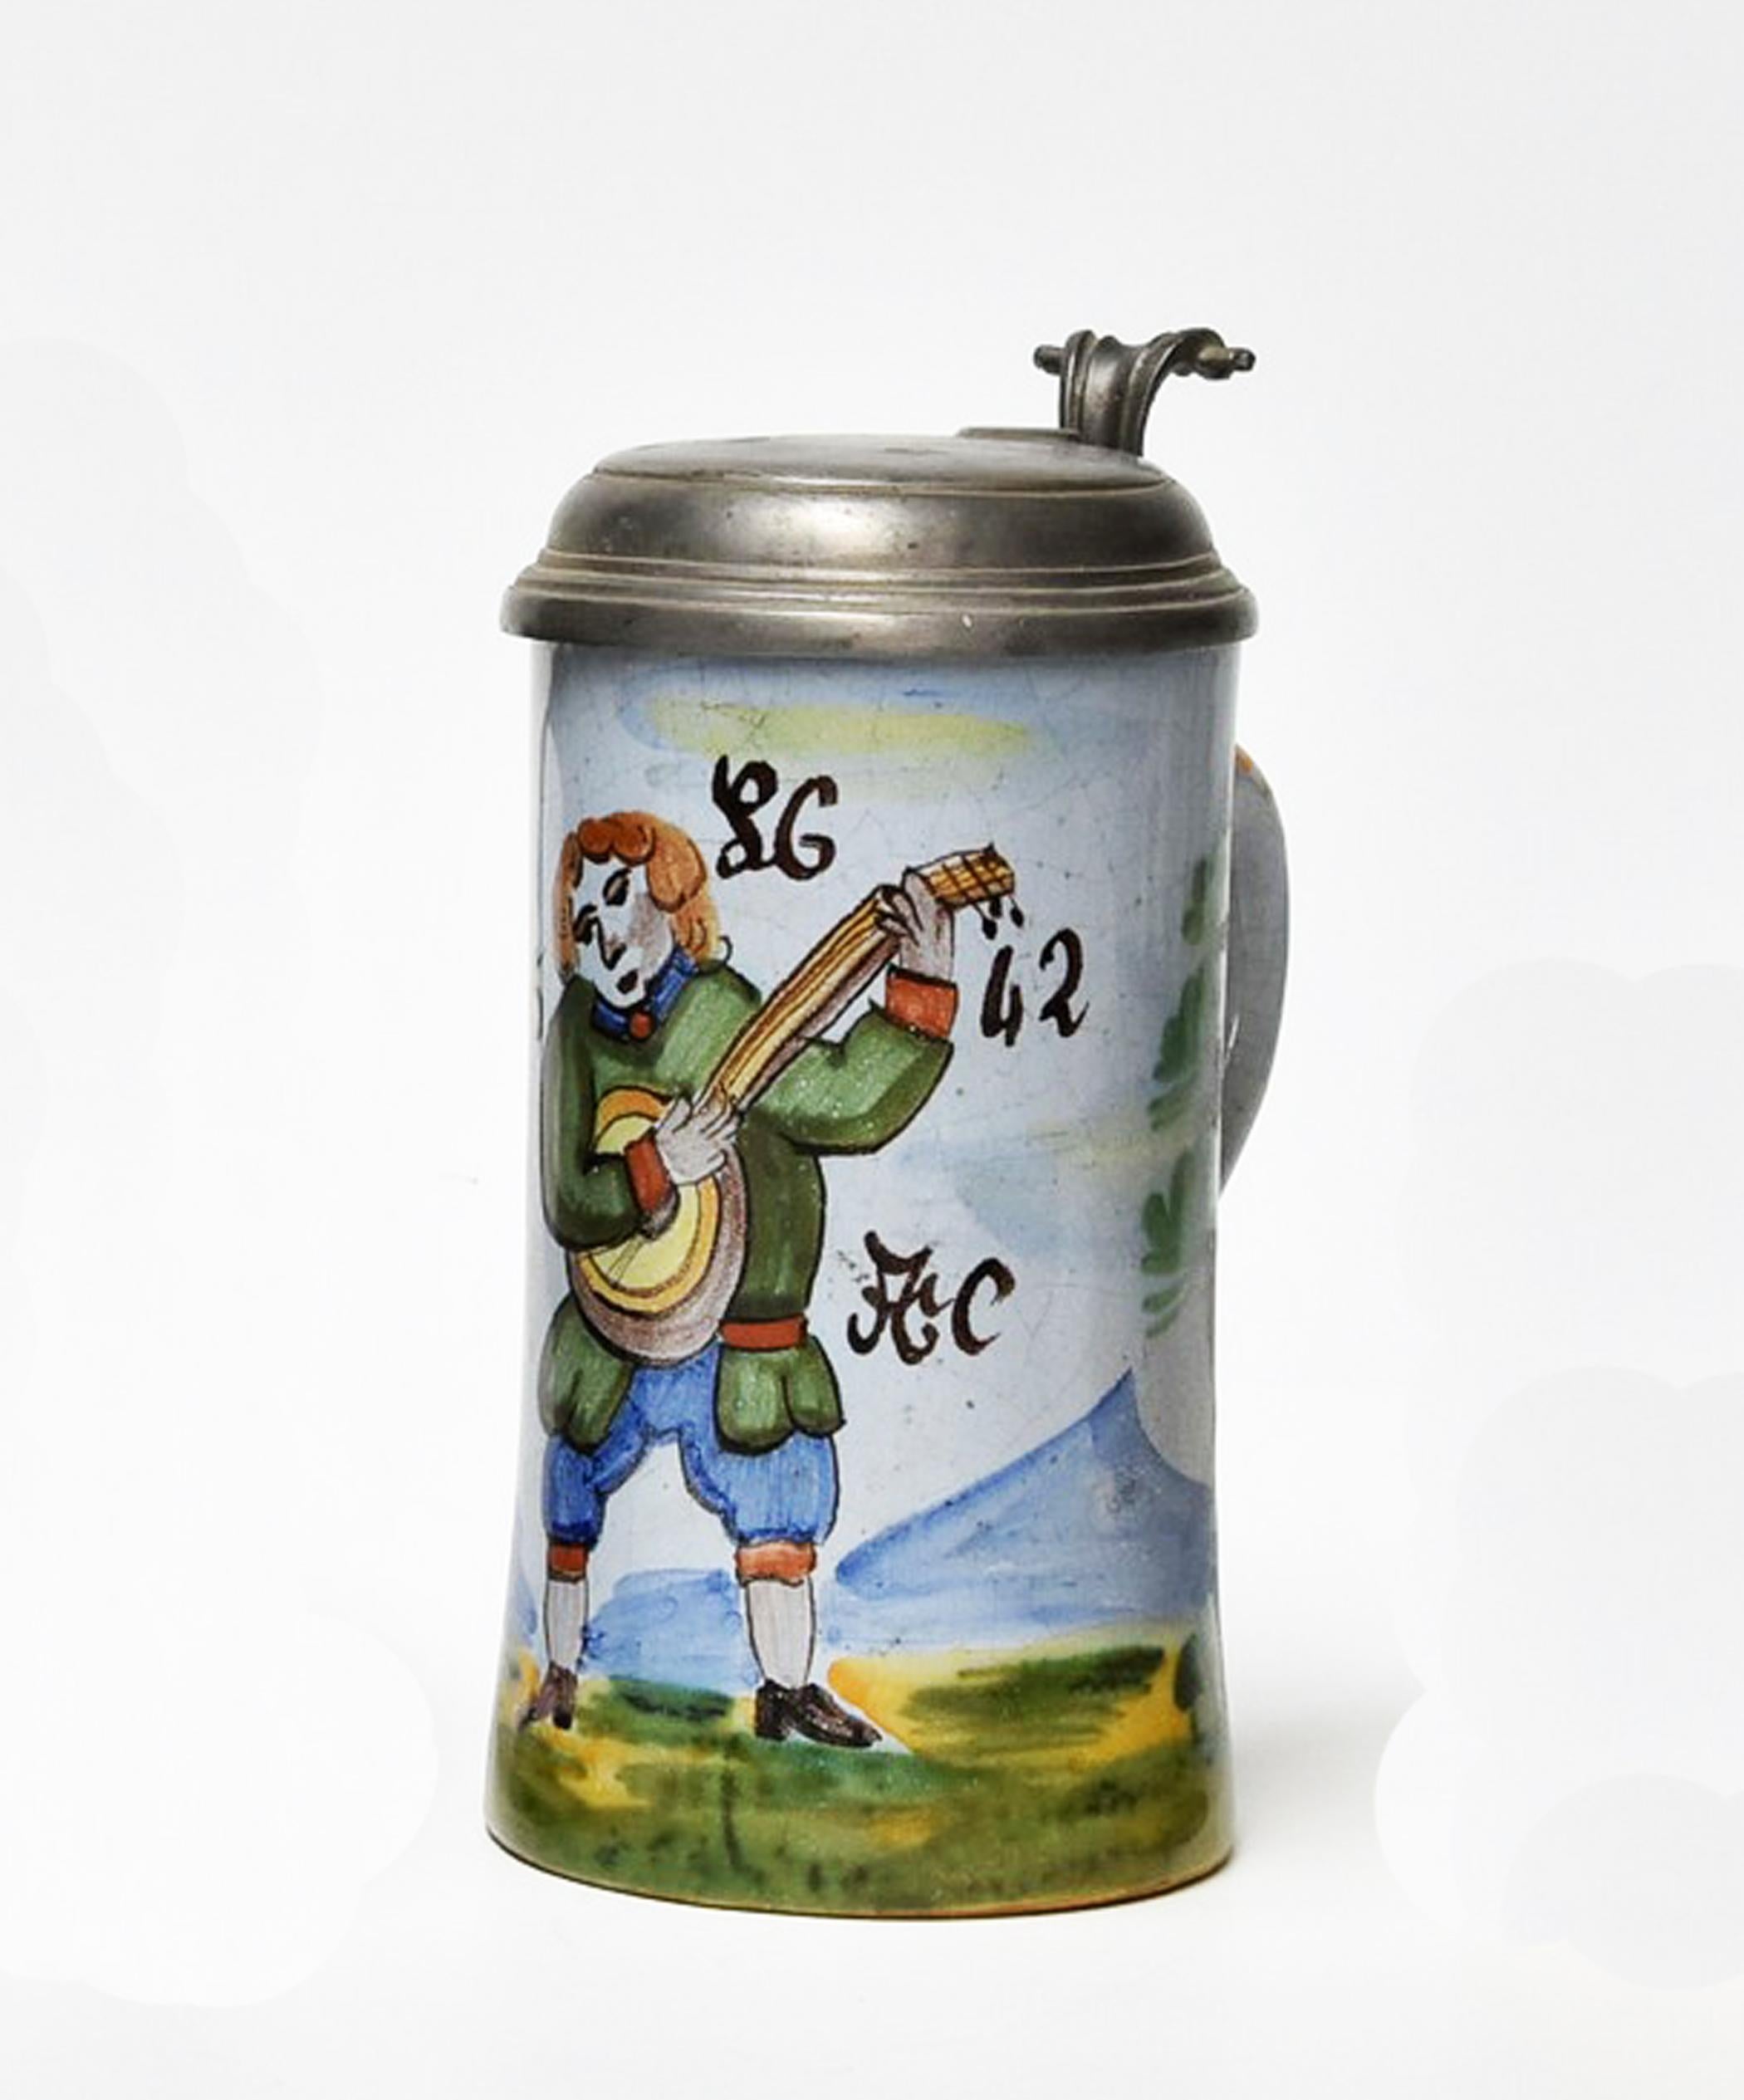 Stoneware 1/2l beer stein with an original pewter hinged lid. The body is decorated with a player, original craquelure.
Made in Germany, circa 1820.